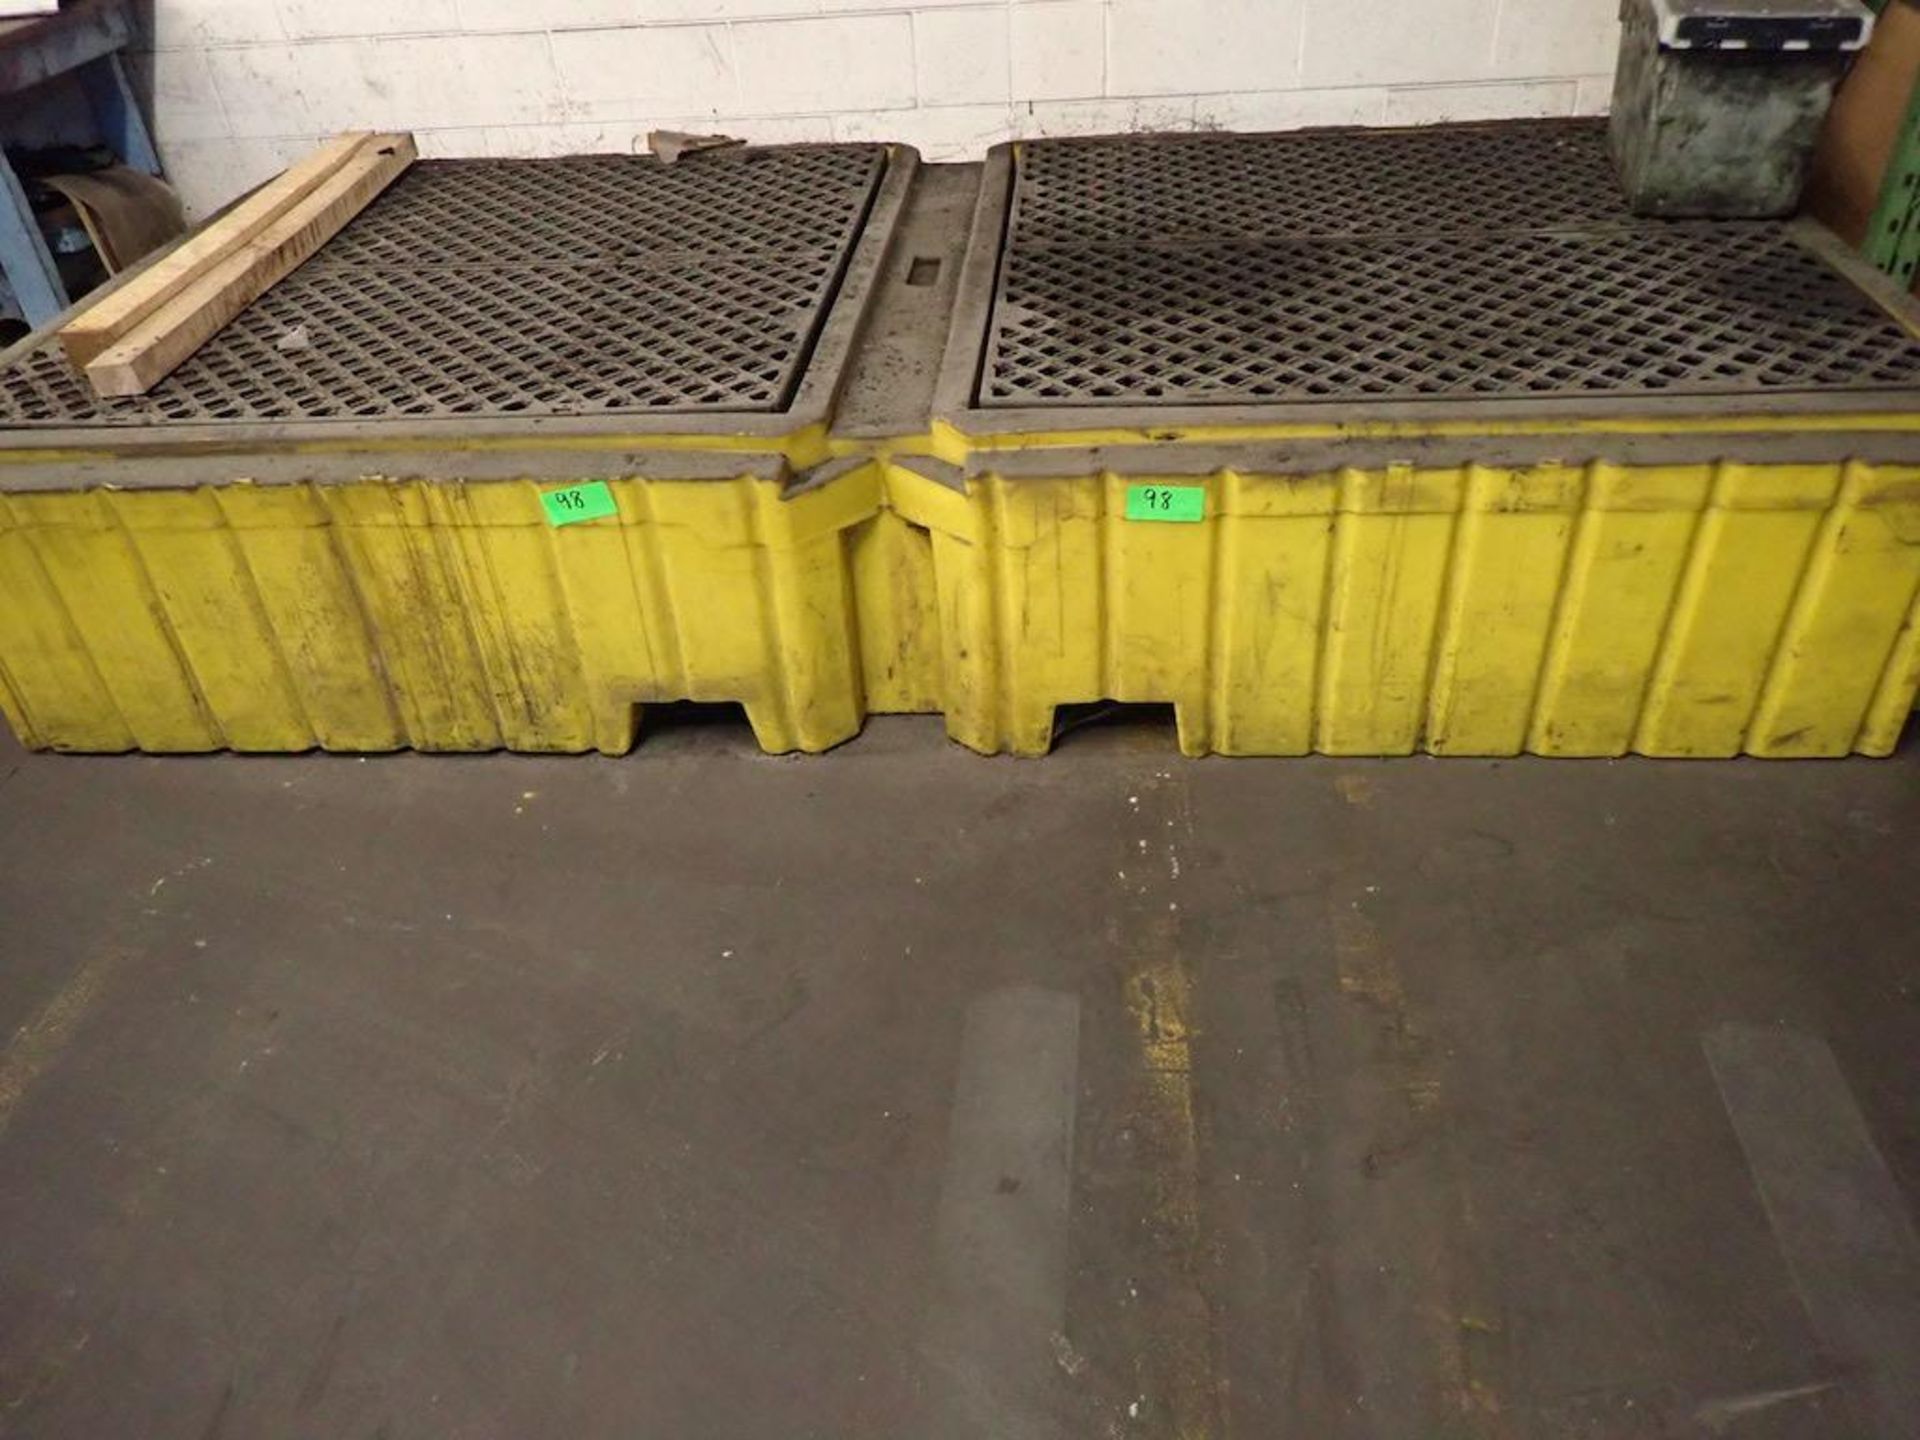 6 UNITS ULTRA TECH SPILL PALLET PLUS (3 AT GLOBAL LINE, 3 BESIDE DRIVE IN GARAGE DOOR) - Image 3 of 4